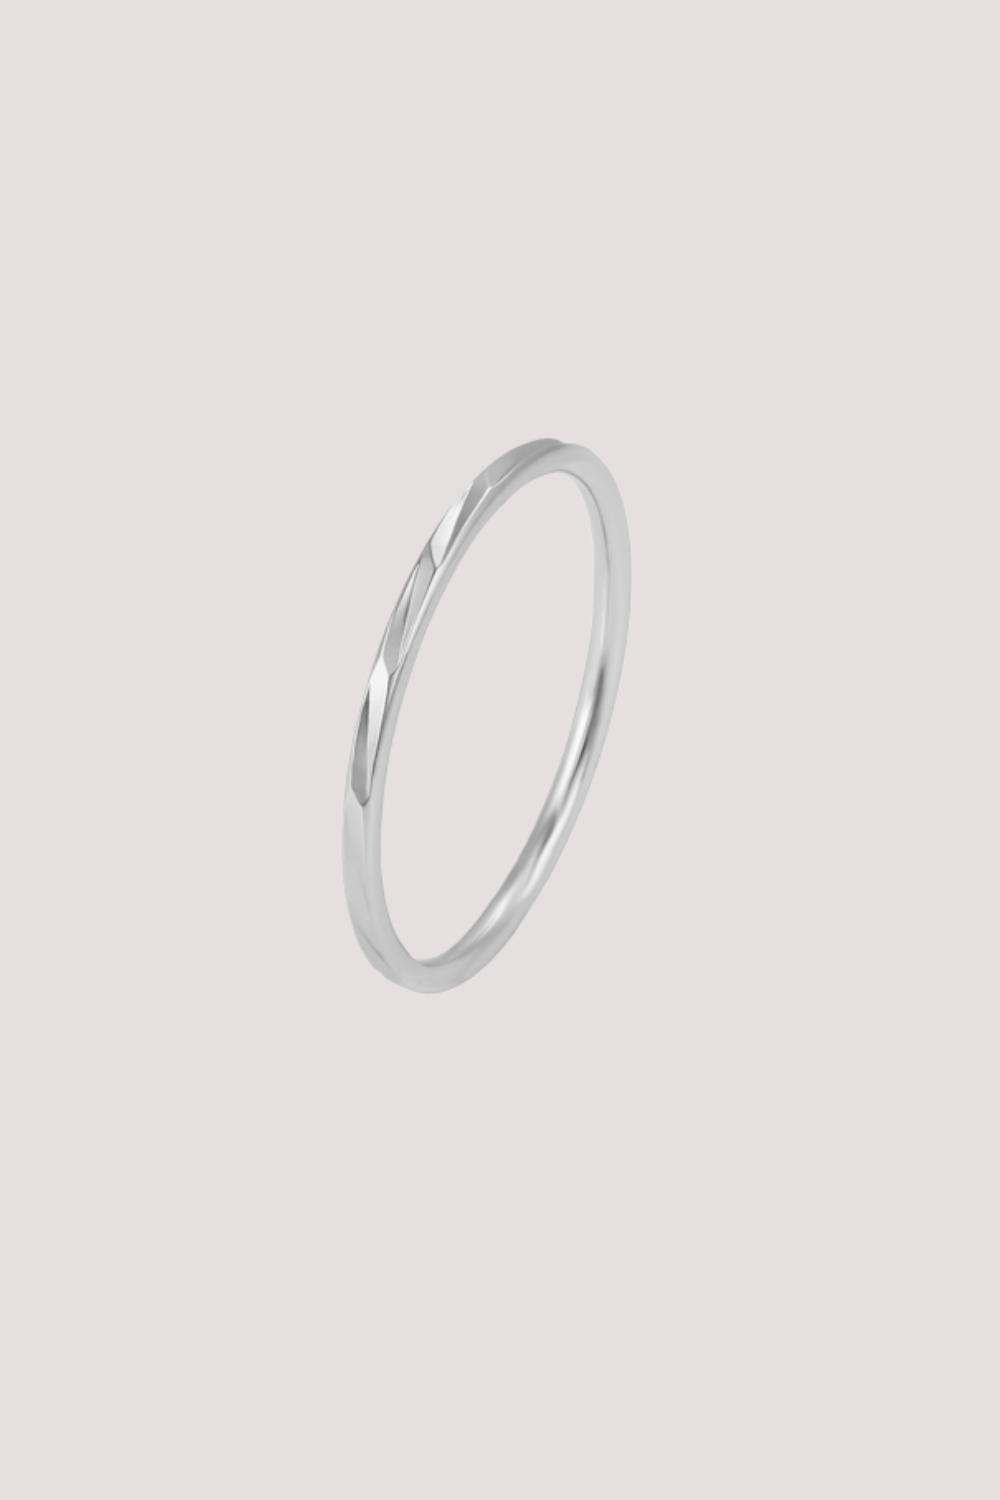 women silver color stacking ring waterproof jewelry gift idea 